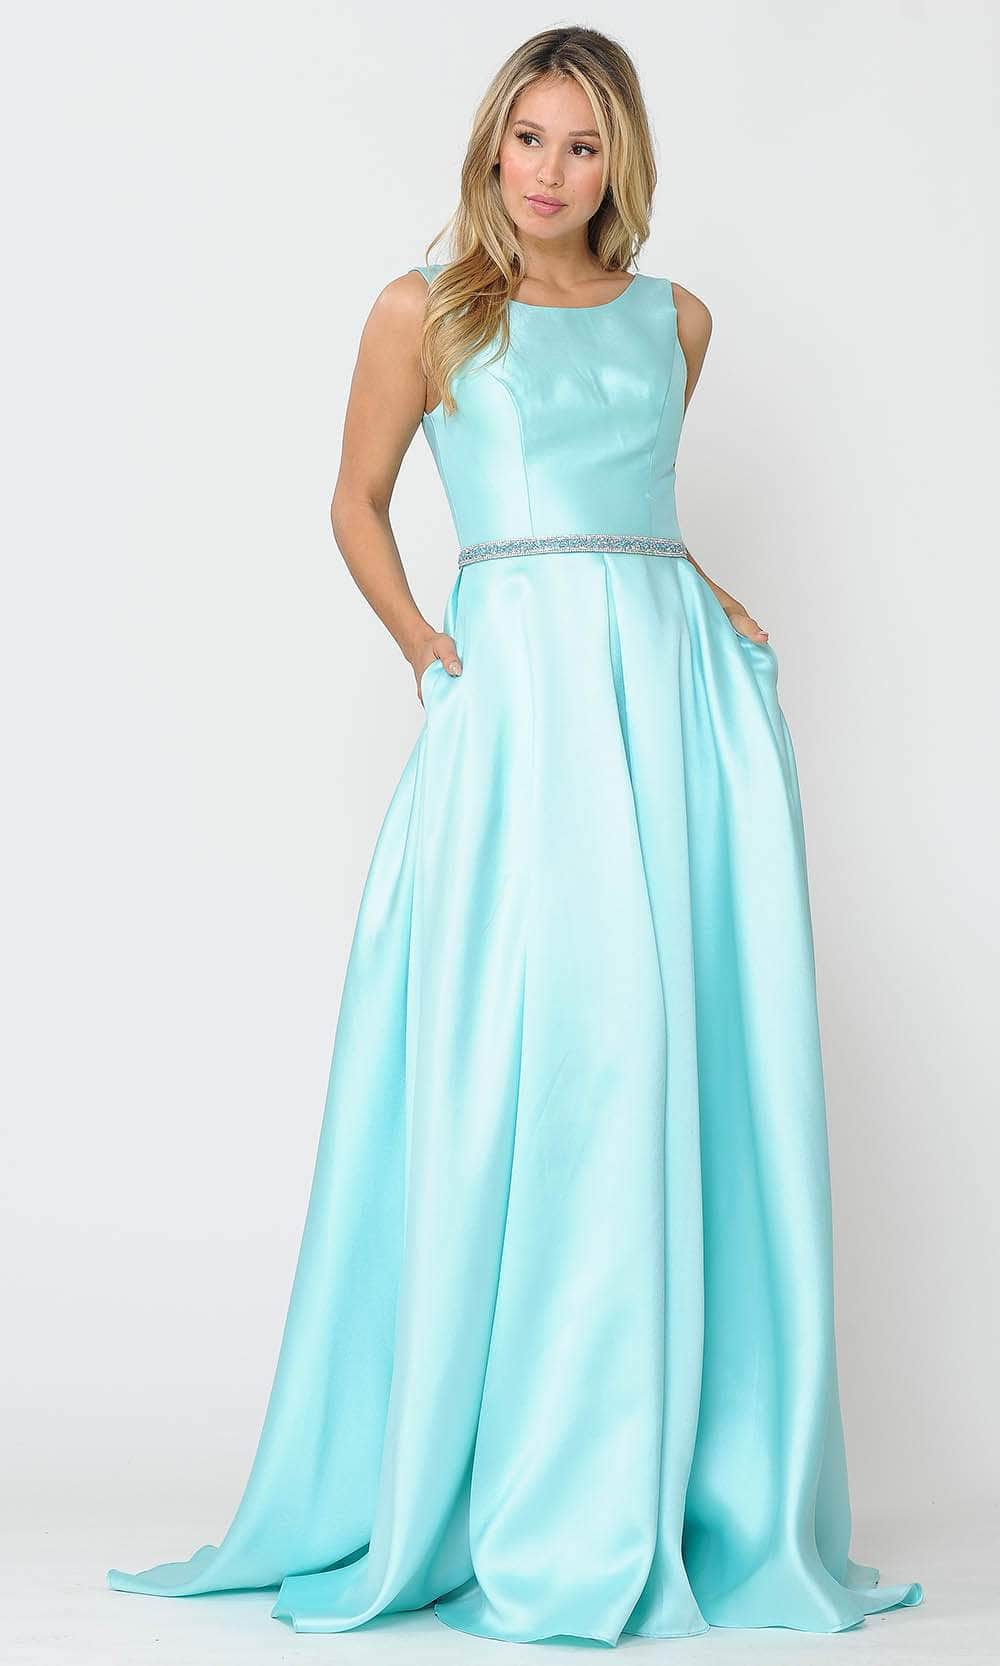 Image of Poly USA 8678 - Sleeveless A-Line Gown